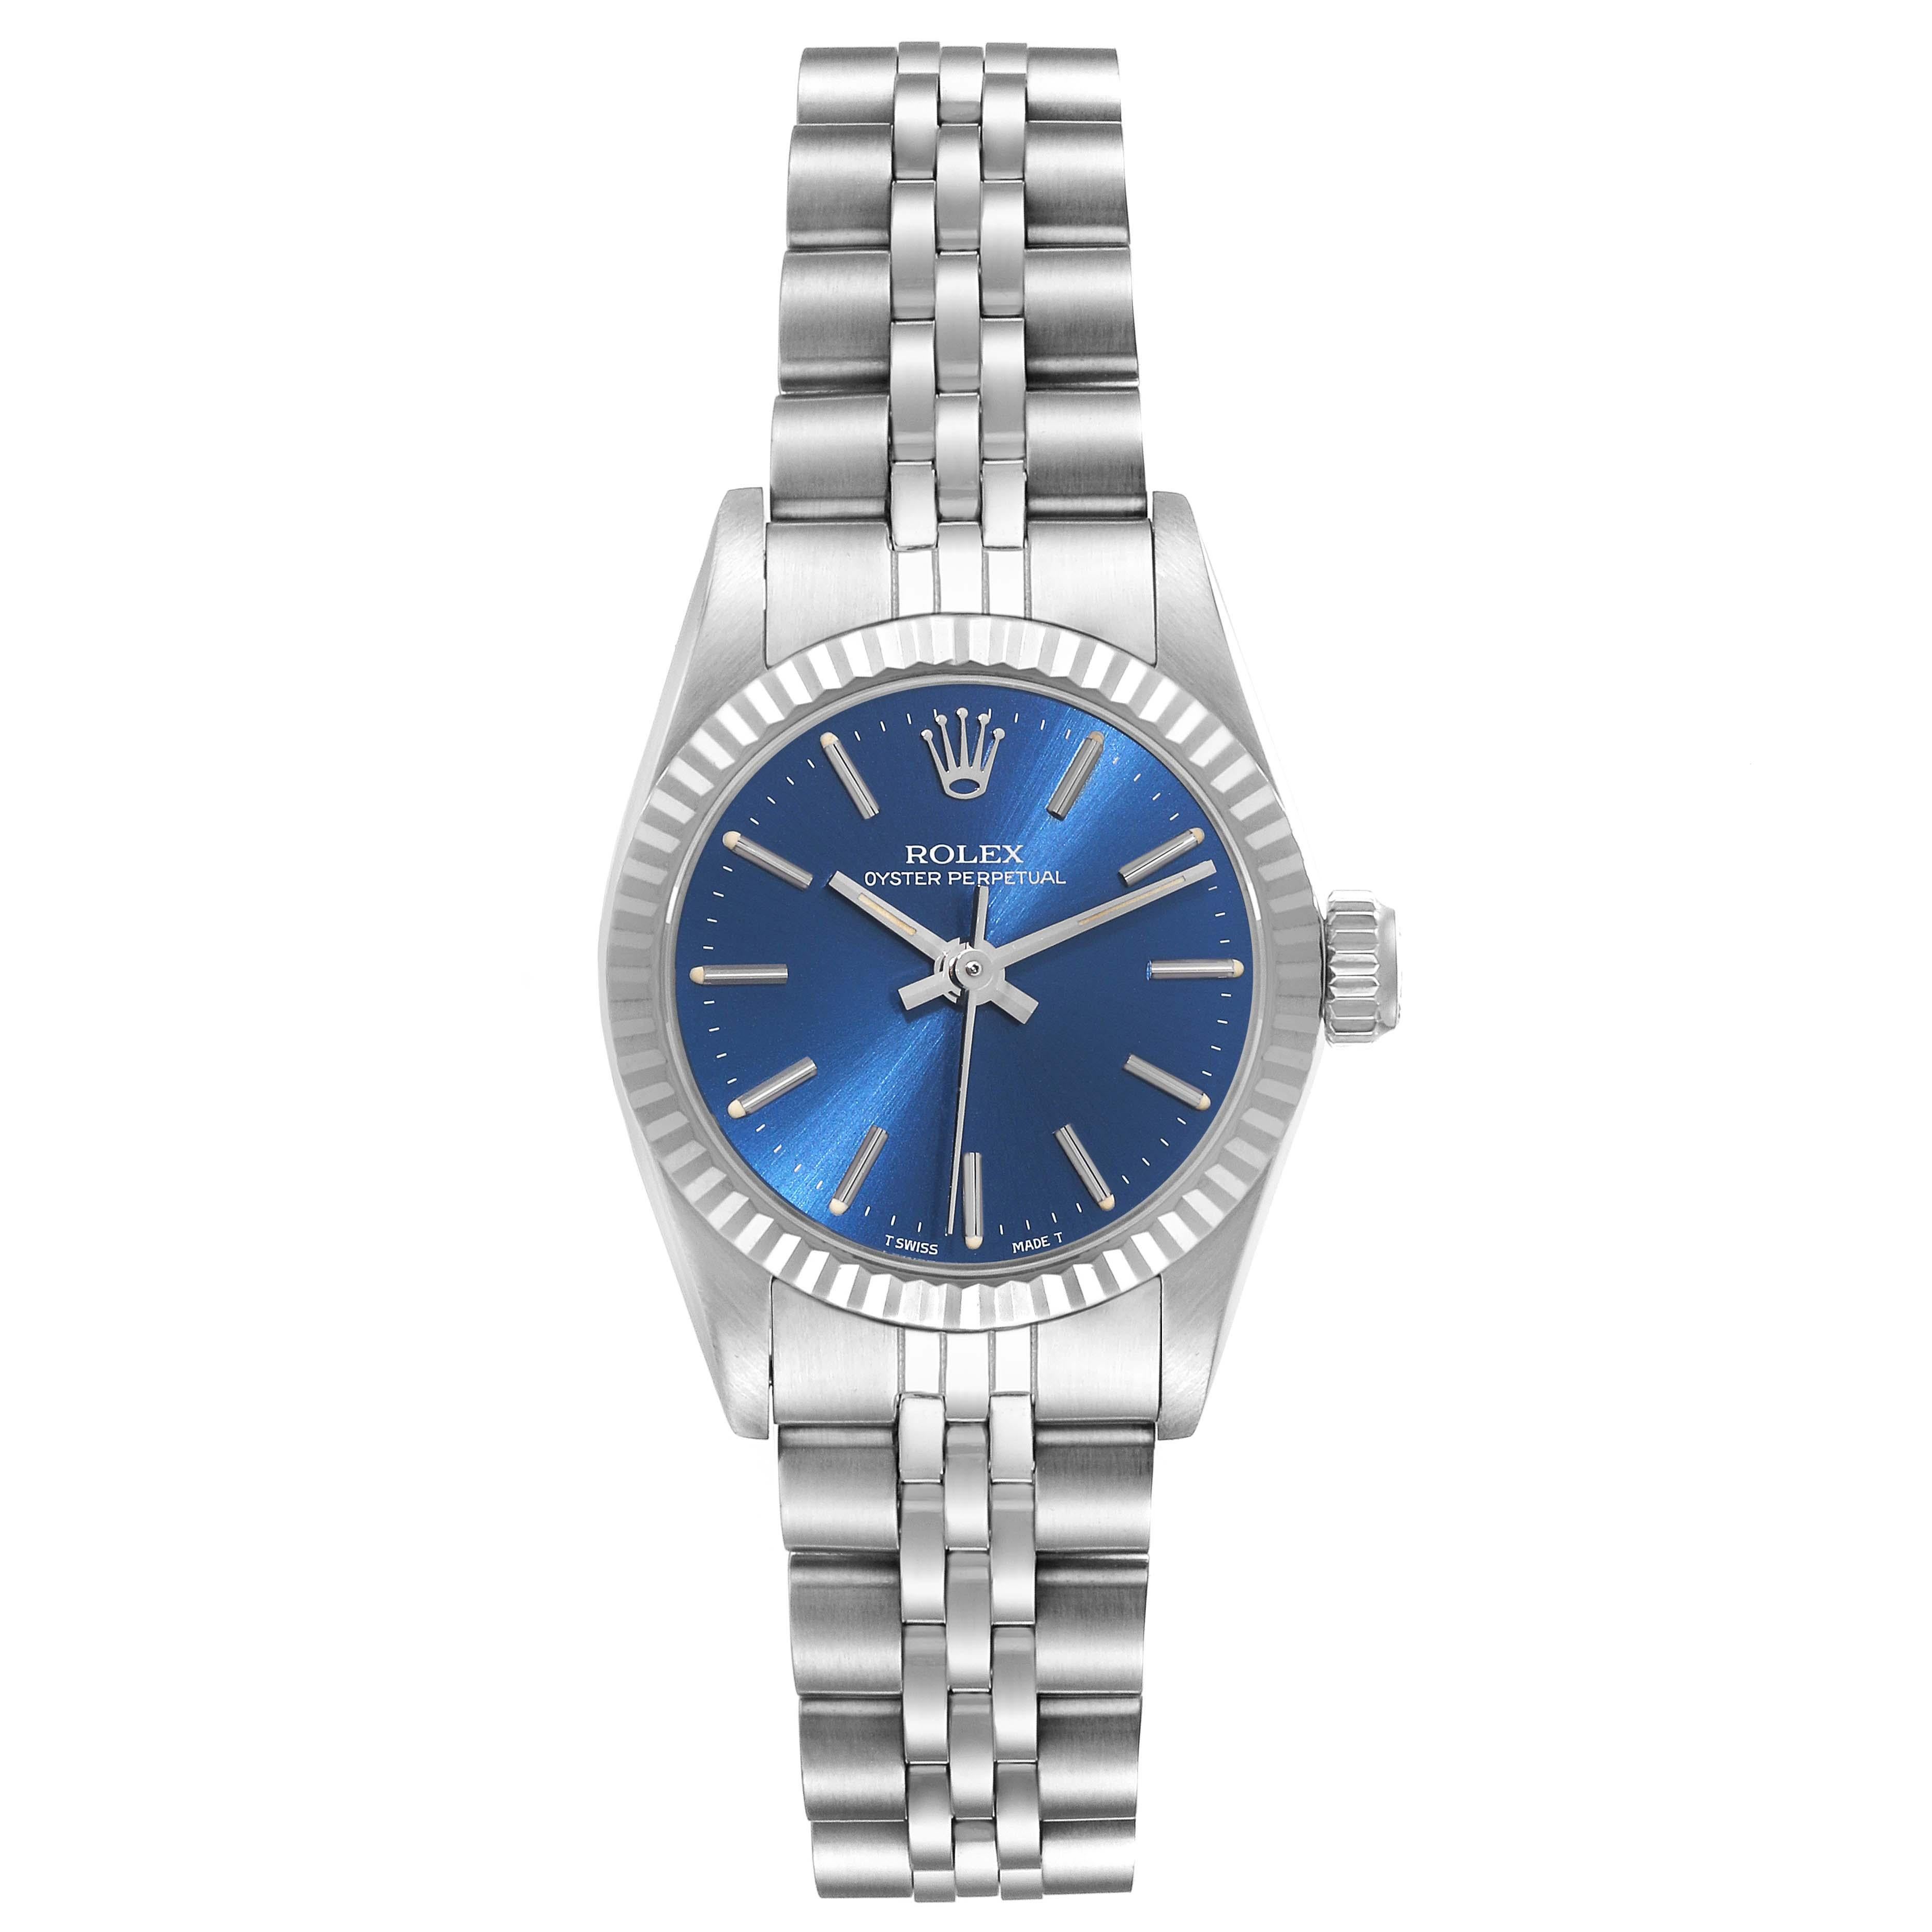 Rolex Oyster Perpetual Steel White Gold Ladies Watch 67194. Officially certified chronometer automatic self-winding movement. Stainless steel oyster case 24.0 mm in diameter. Rolex logo on the crown. 18k white gold fluted bezel. Scratch resistant